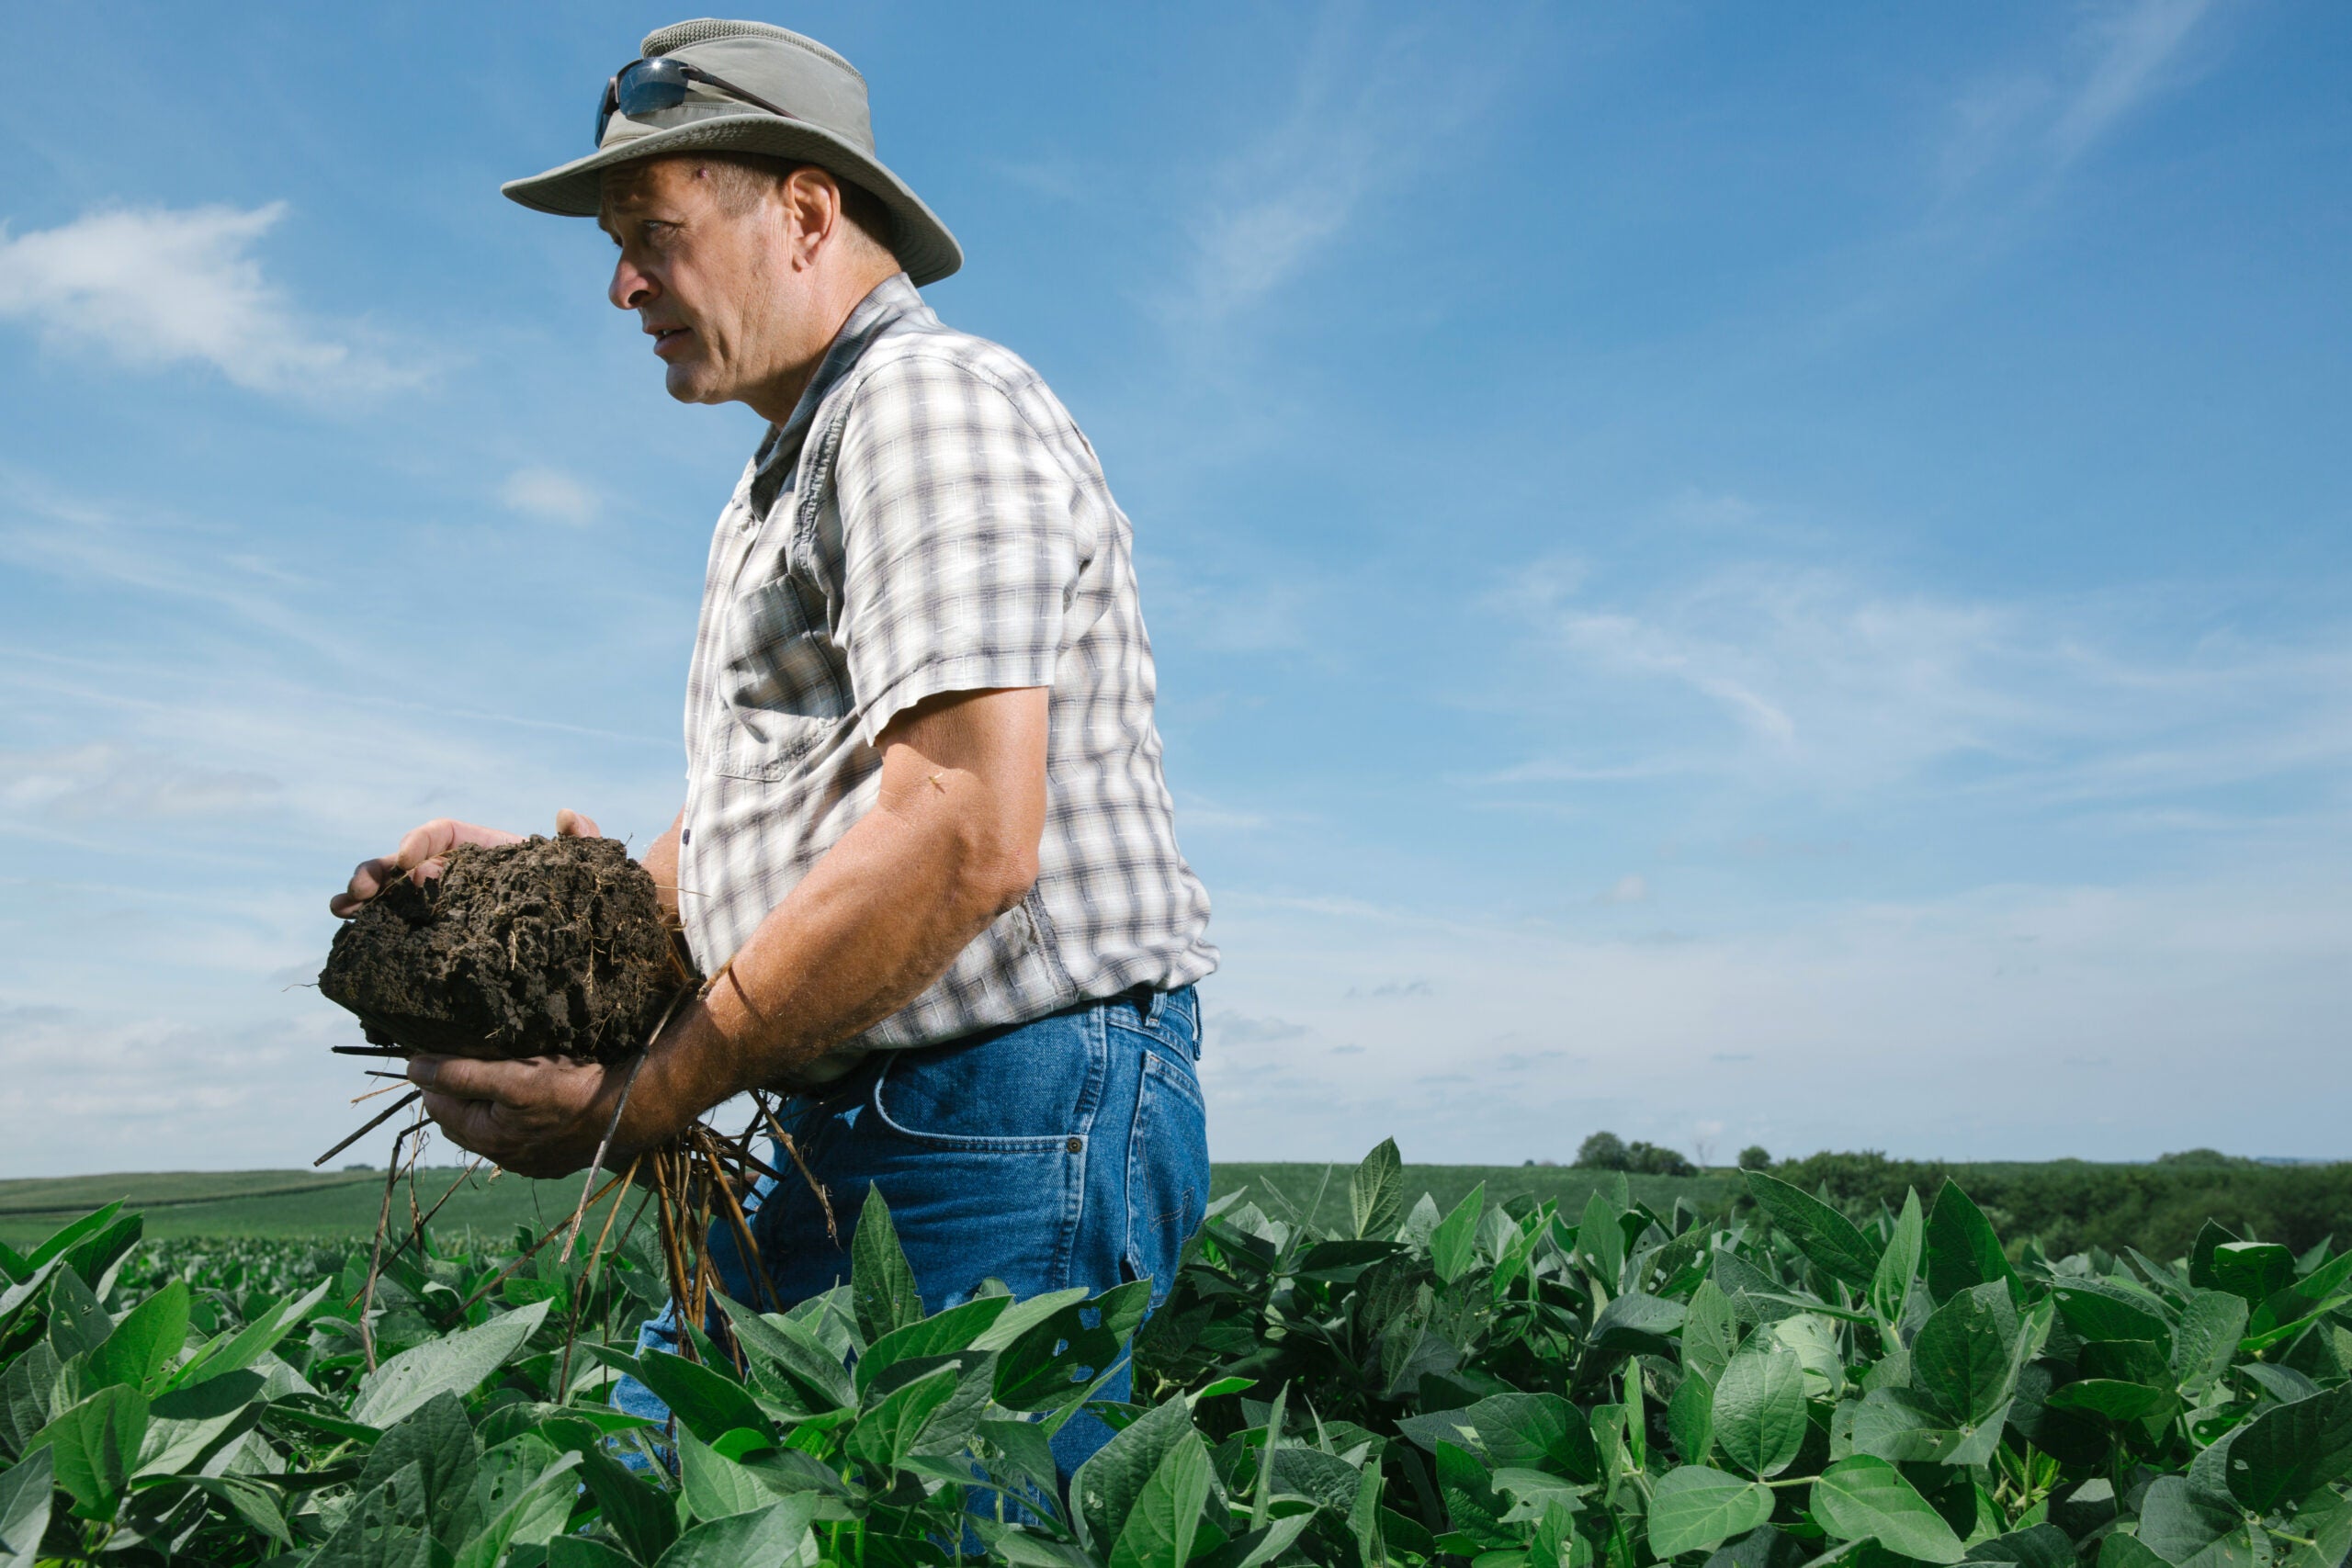 Chris Teachout, a fifth-generation farmer, examines the quality of his soil, which he keeps healthy by planting cover crops on his farm in southwest Iowa.
(Brad Zweerink for Earthjustice)